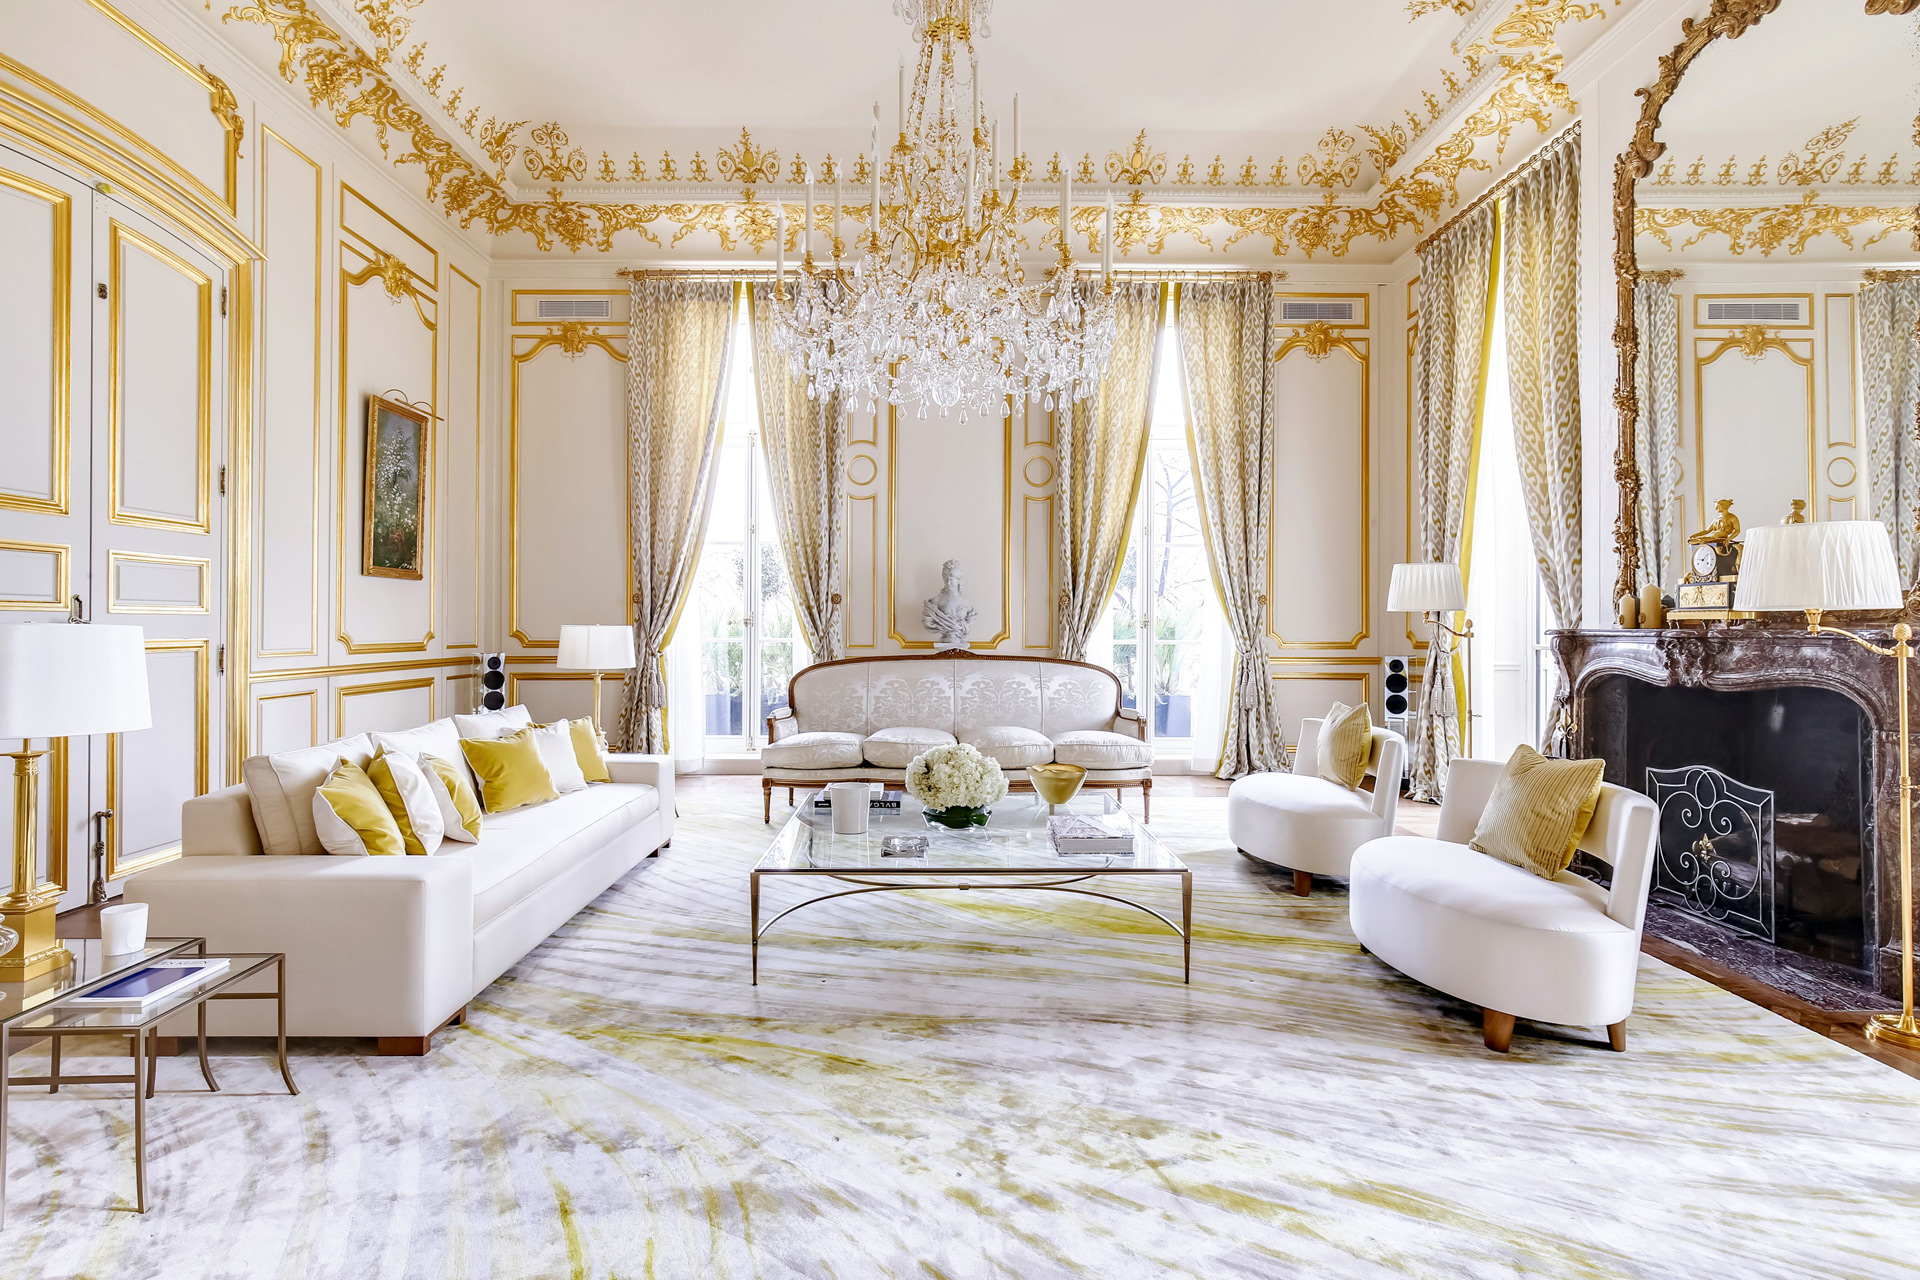 Living room in Paris apartment with white sofas, gilt-edged walls and a stone fireplace.